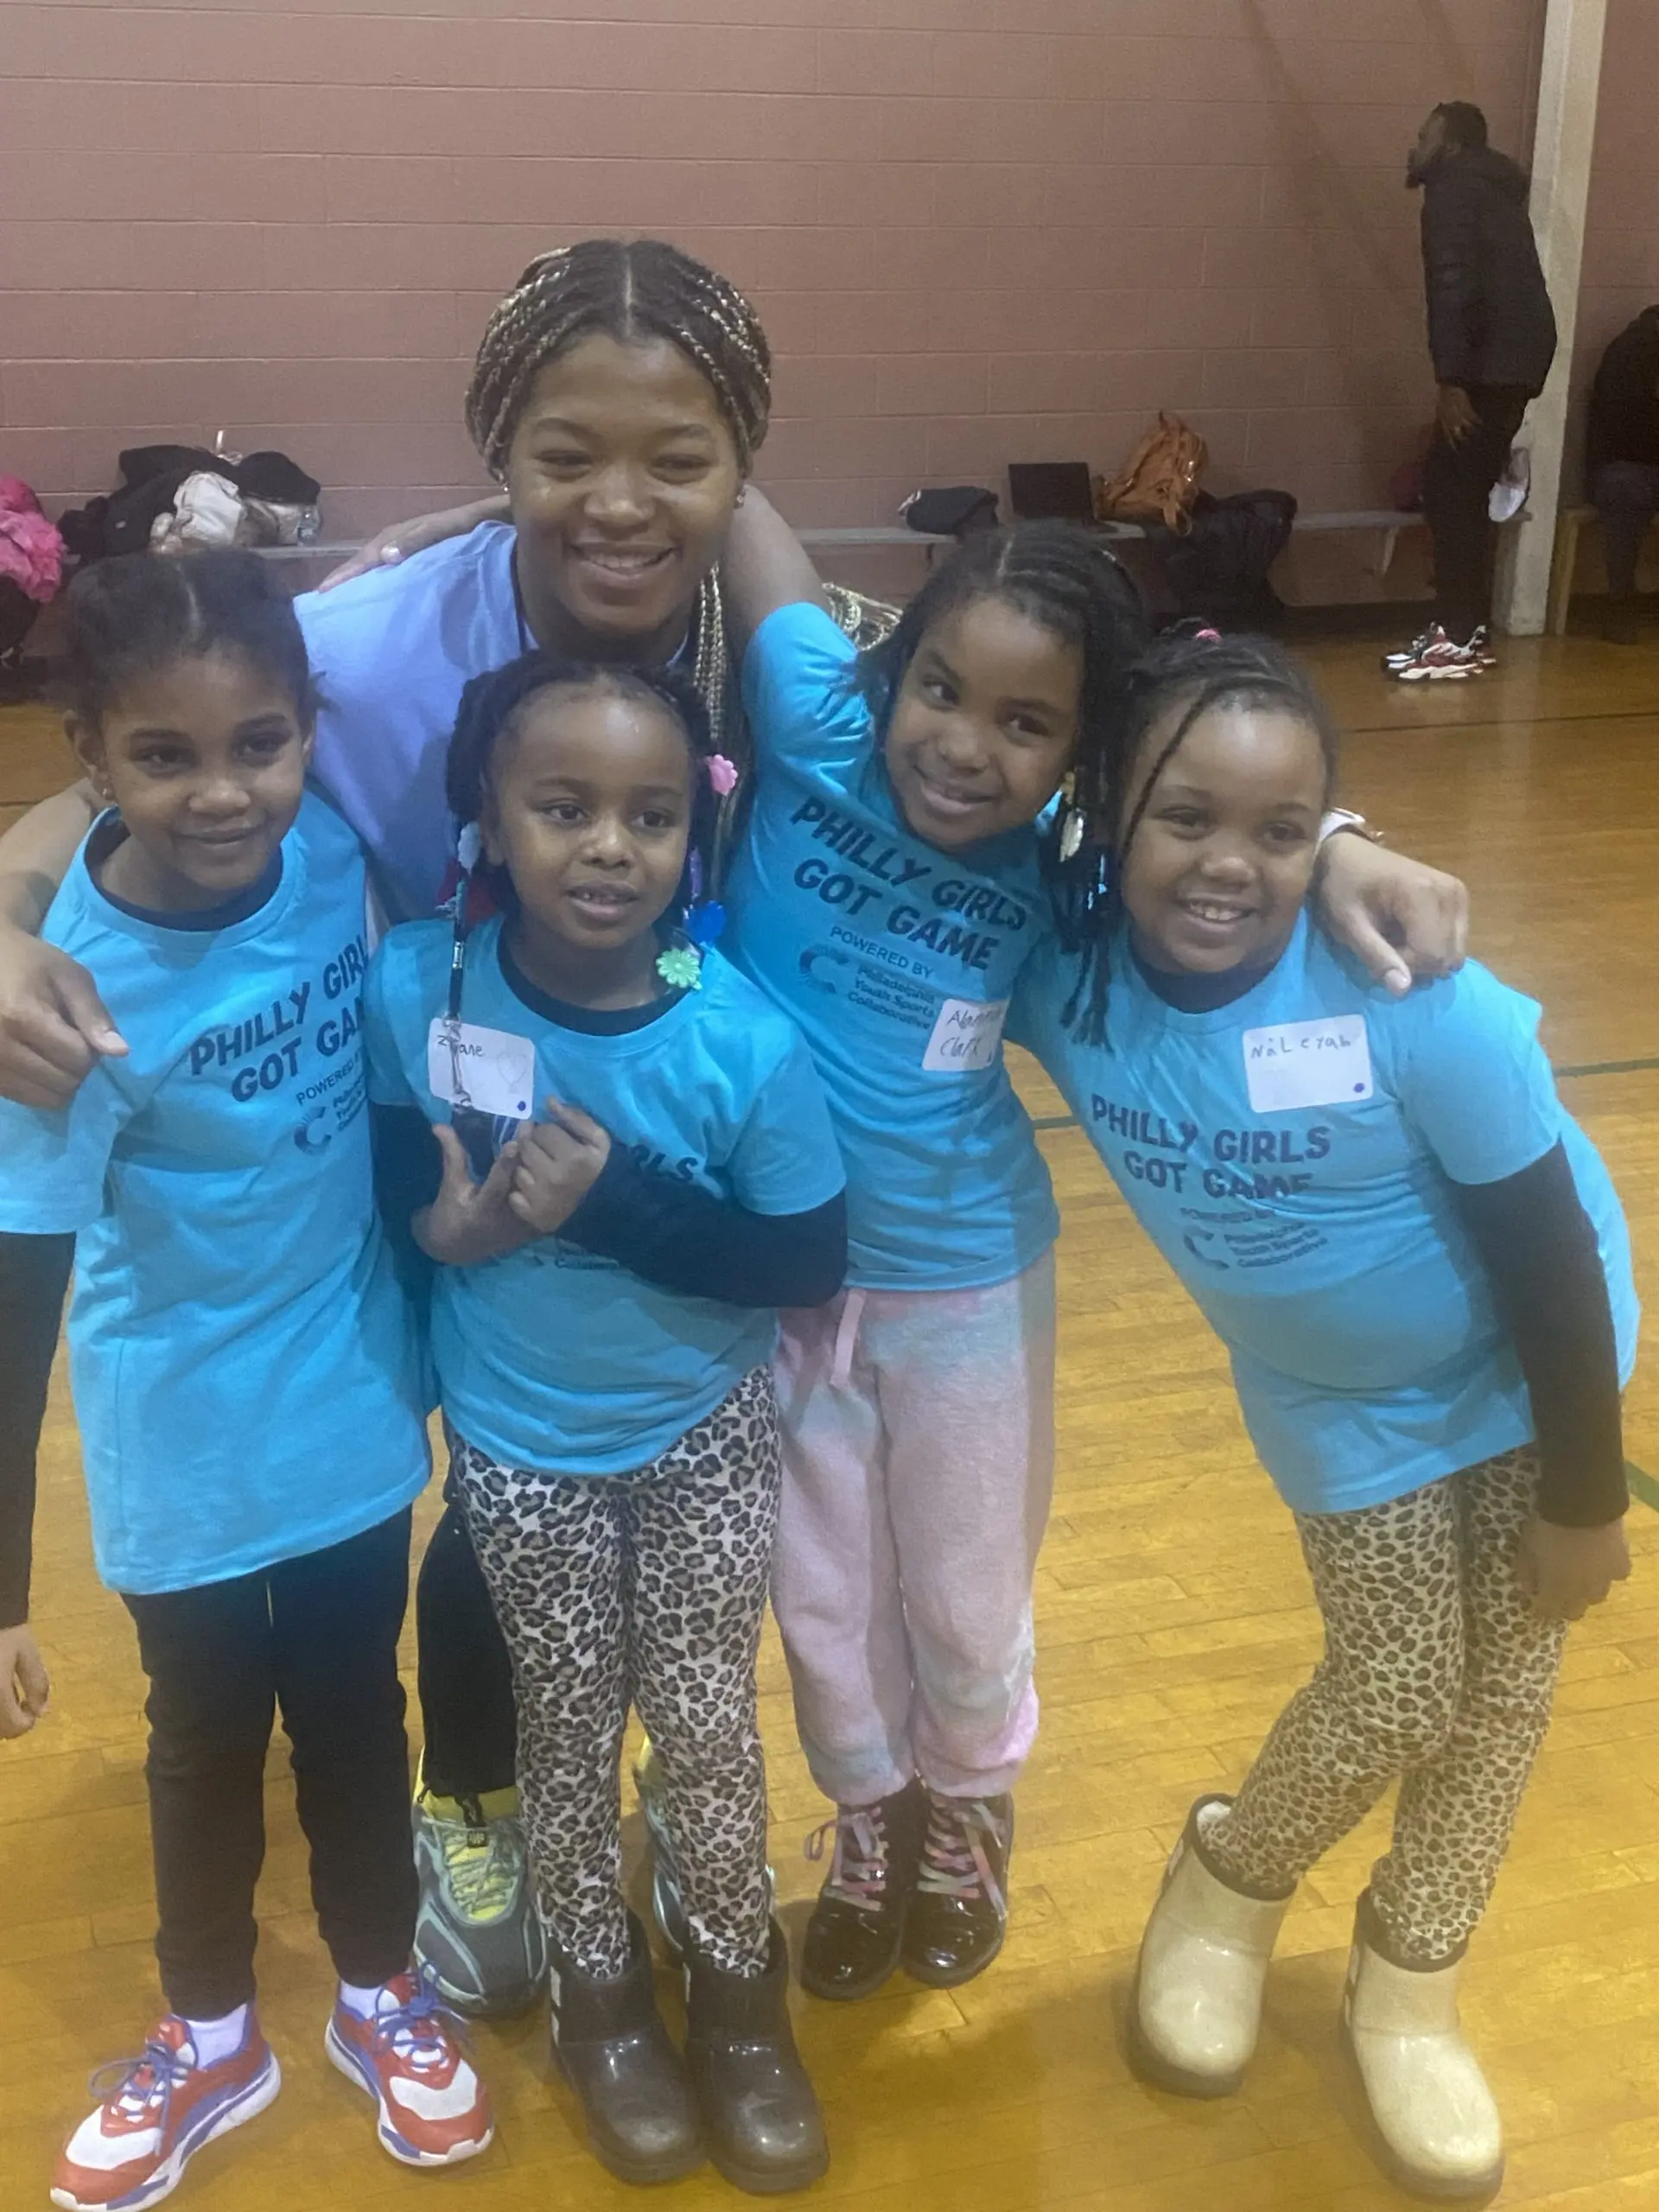 Featured image: TeamSnap Impact Event Recap: Philly Girls Got Game